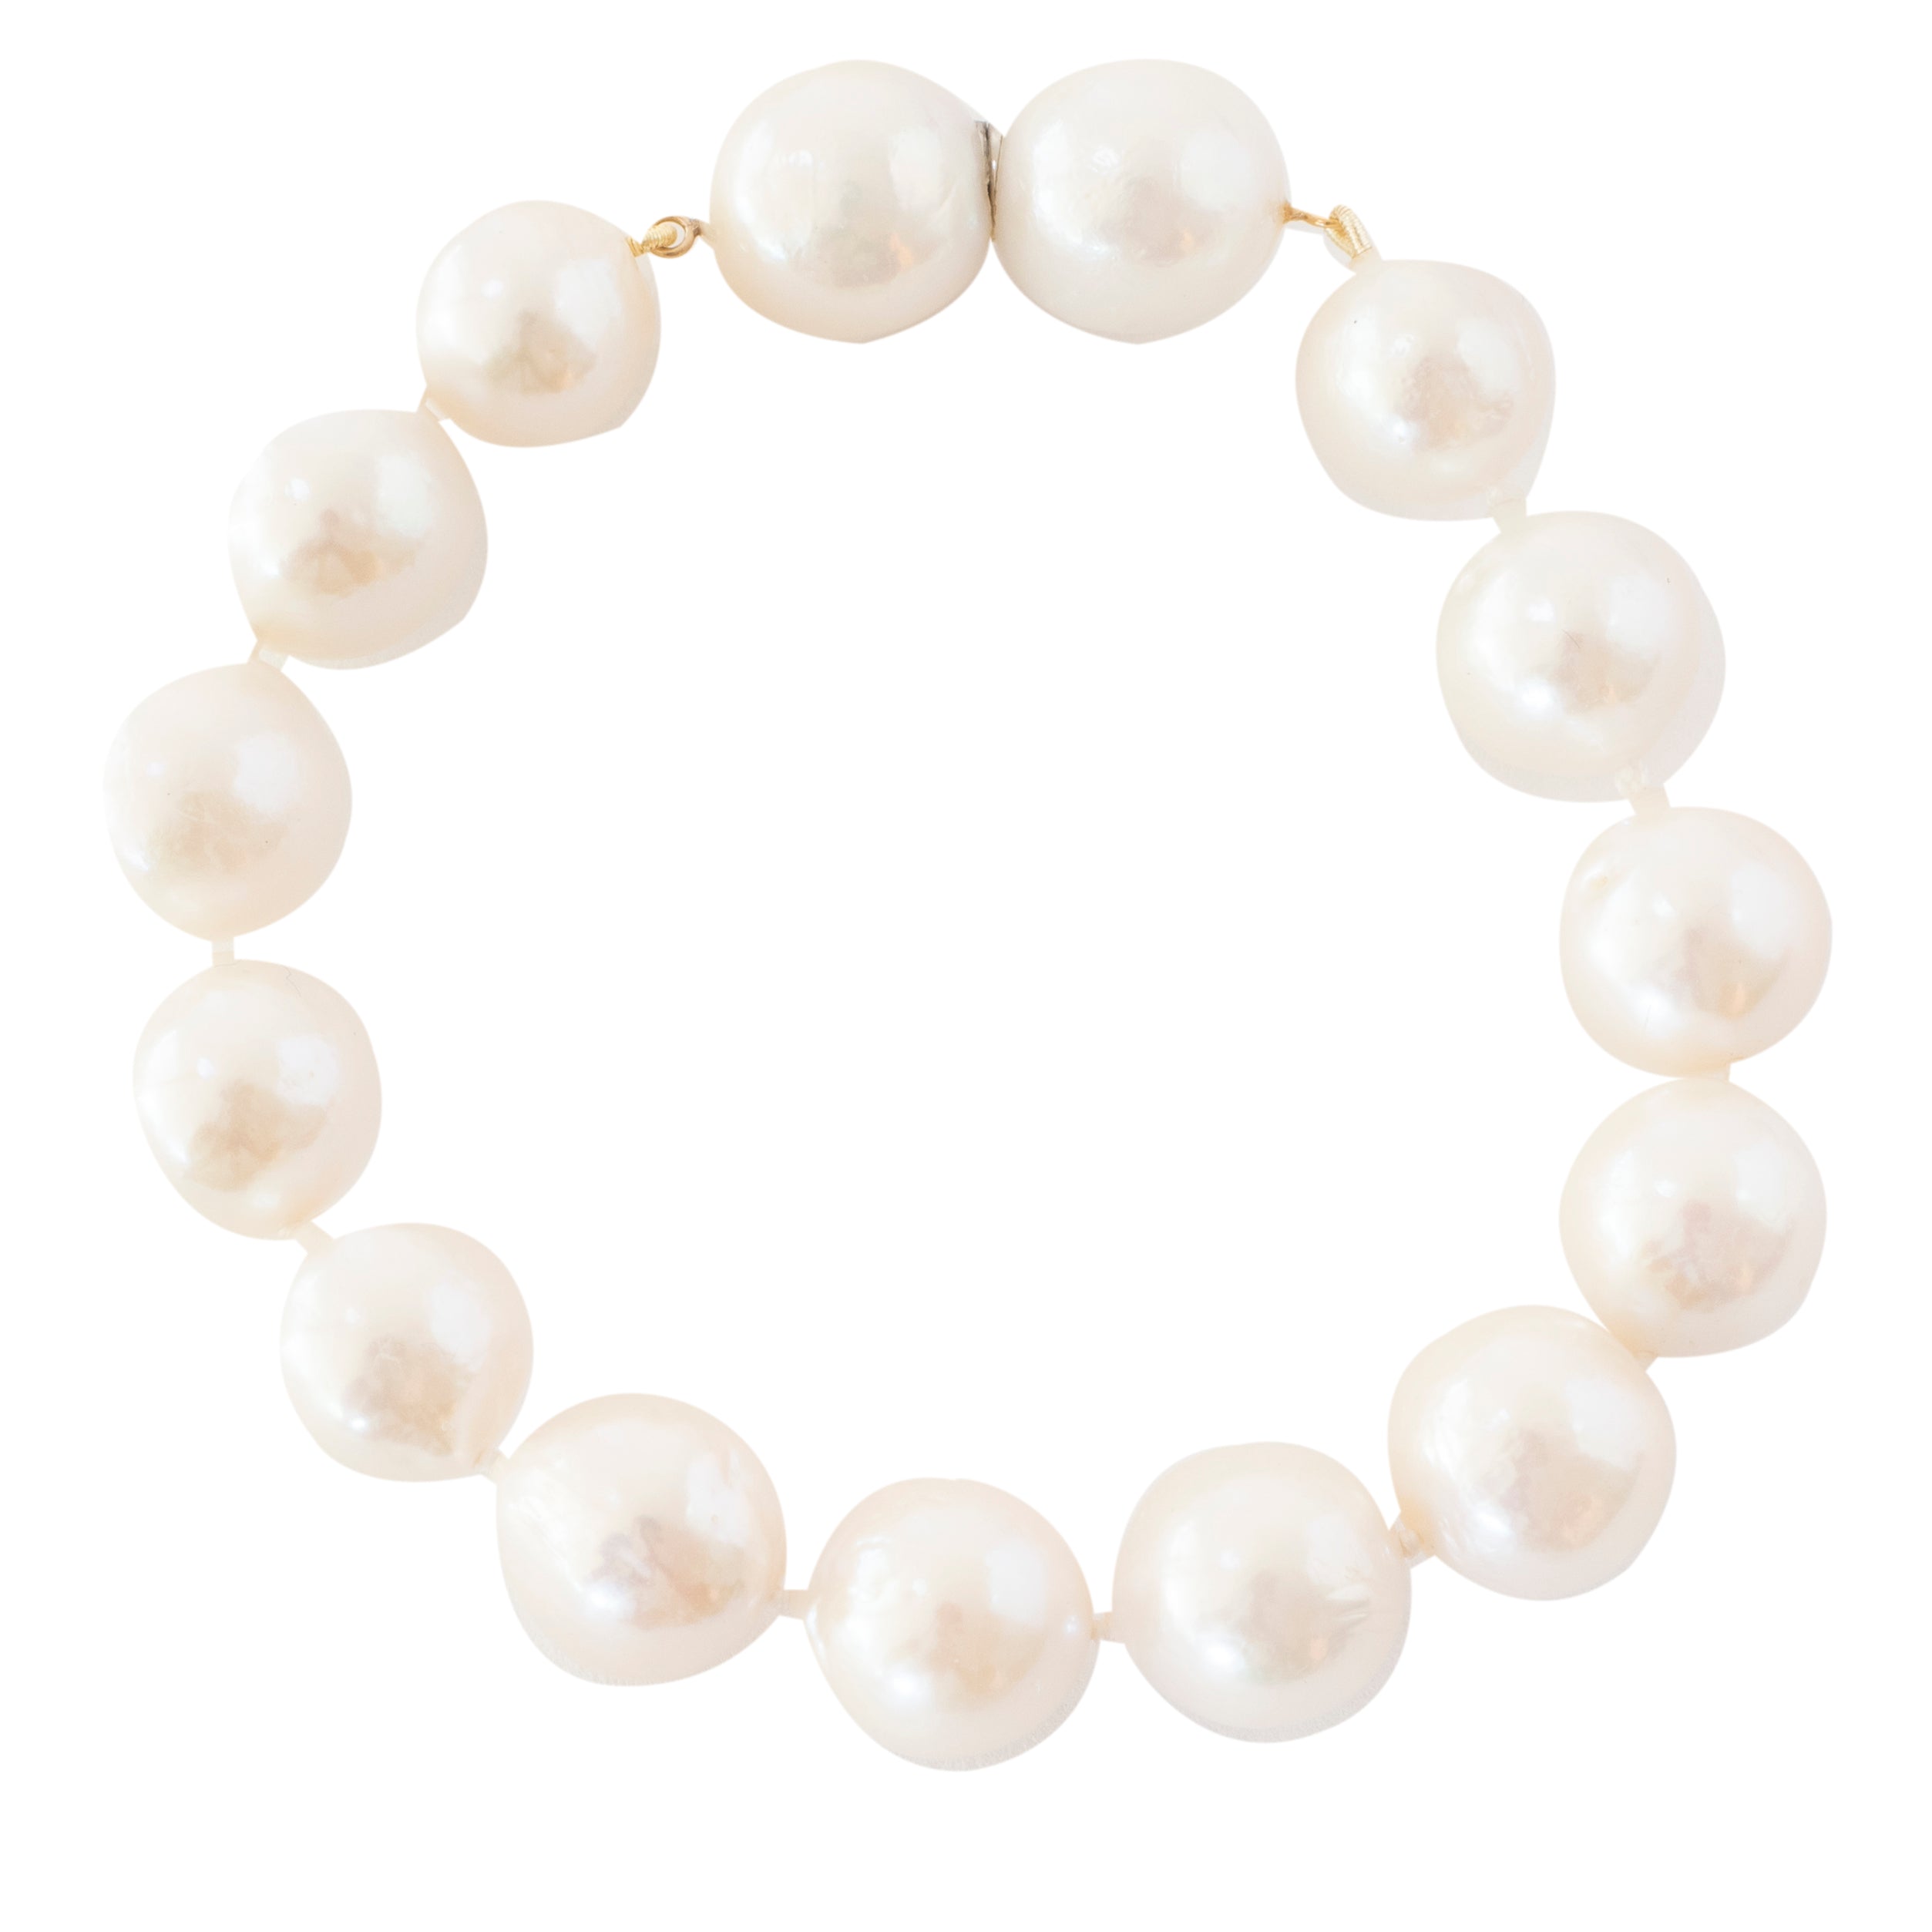 Freshwater Pearl Bracelet with Silver Clasp | Jewlr